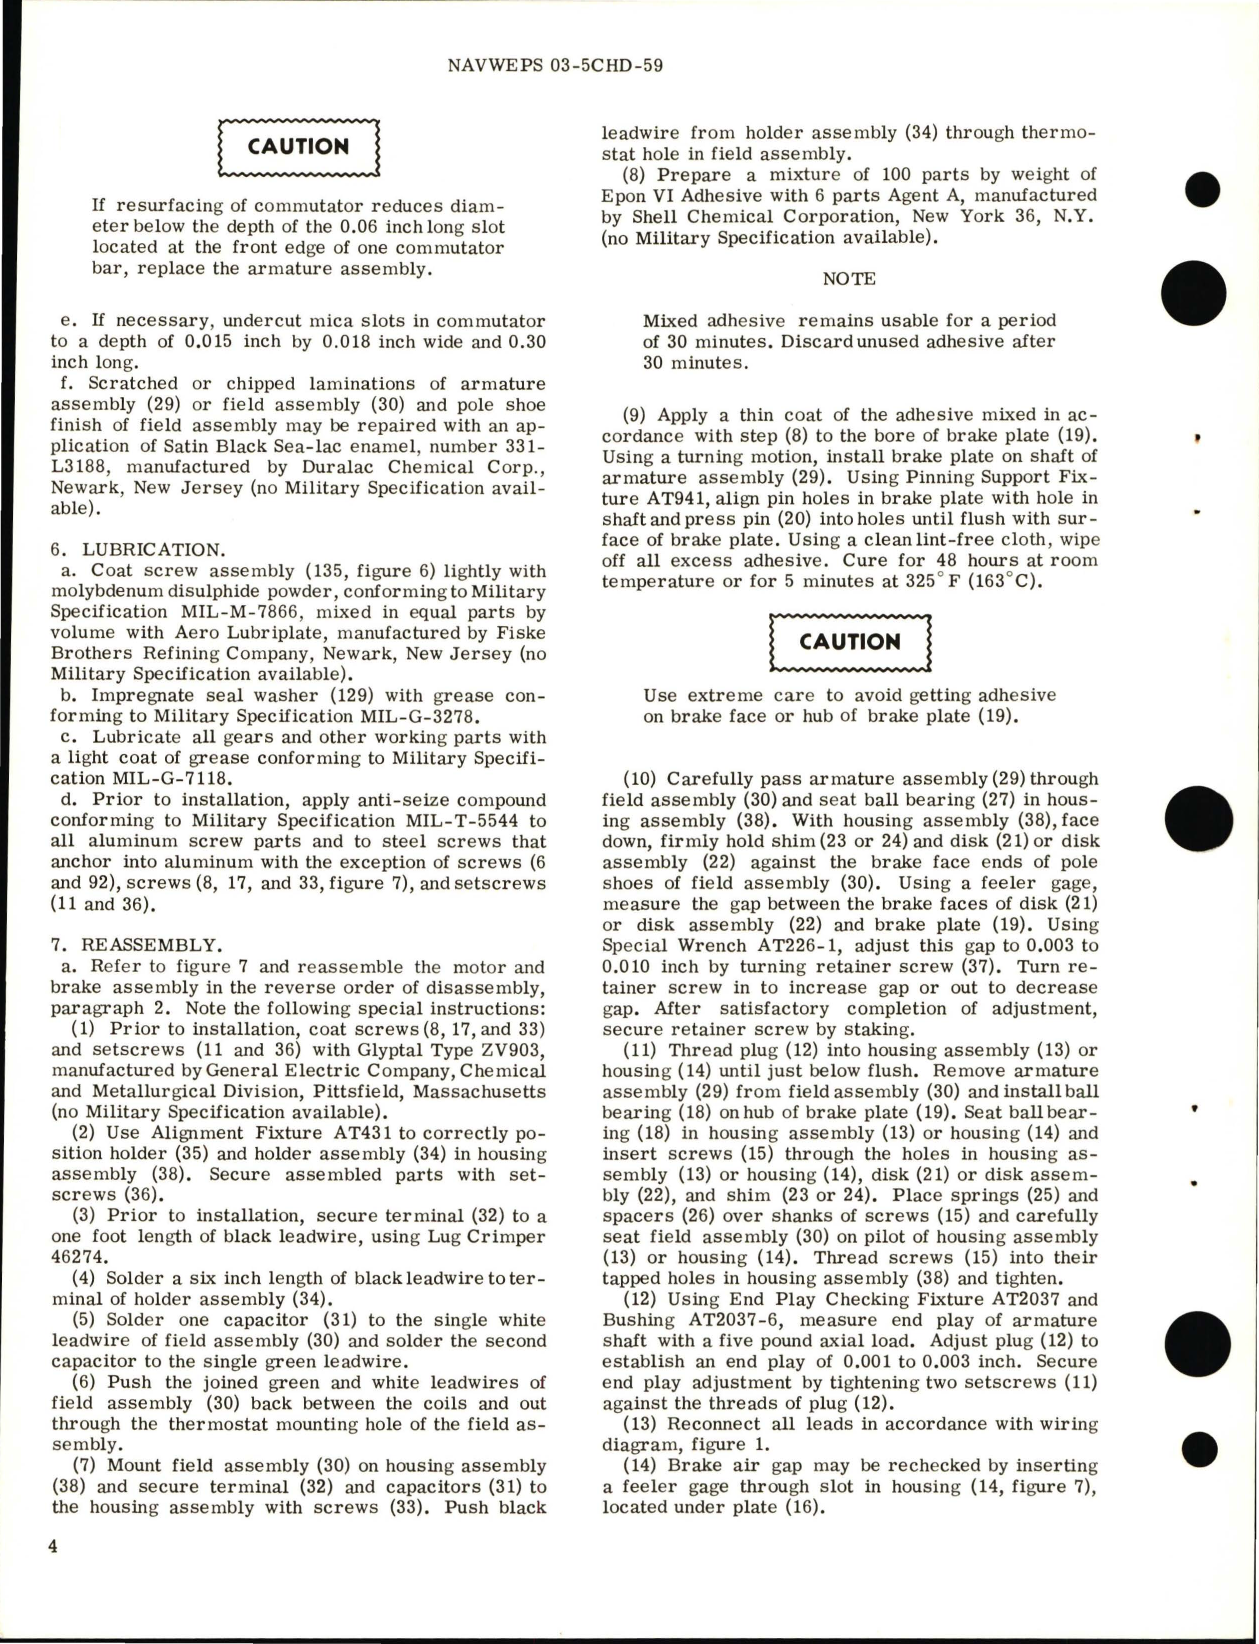 Sample page 6 from AirCorps Library document: Overhaul Instructions with Parts Breakdown for Electro-Mechanical Linear Actuator Model L16-8-1 and R1680-720-5810-XABN